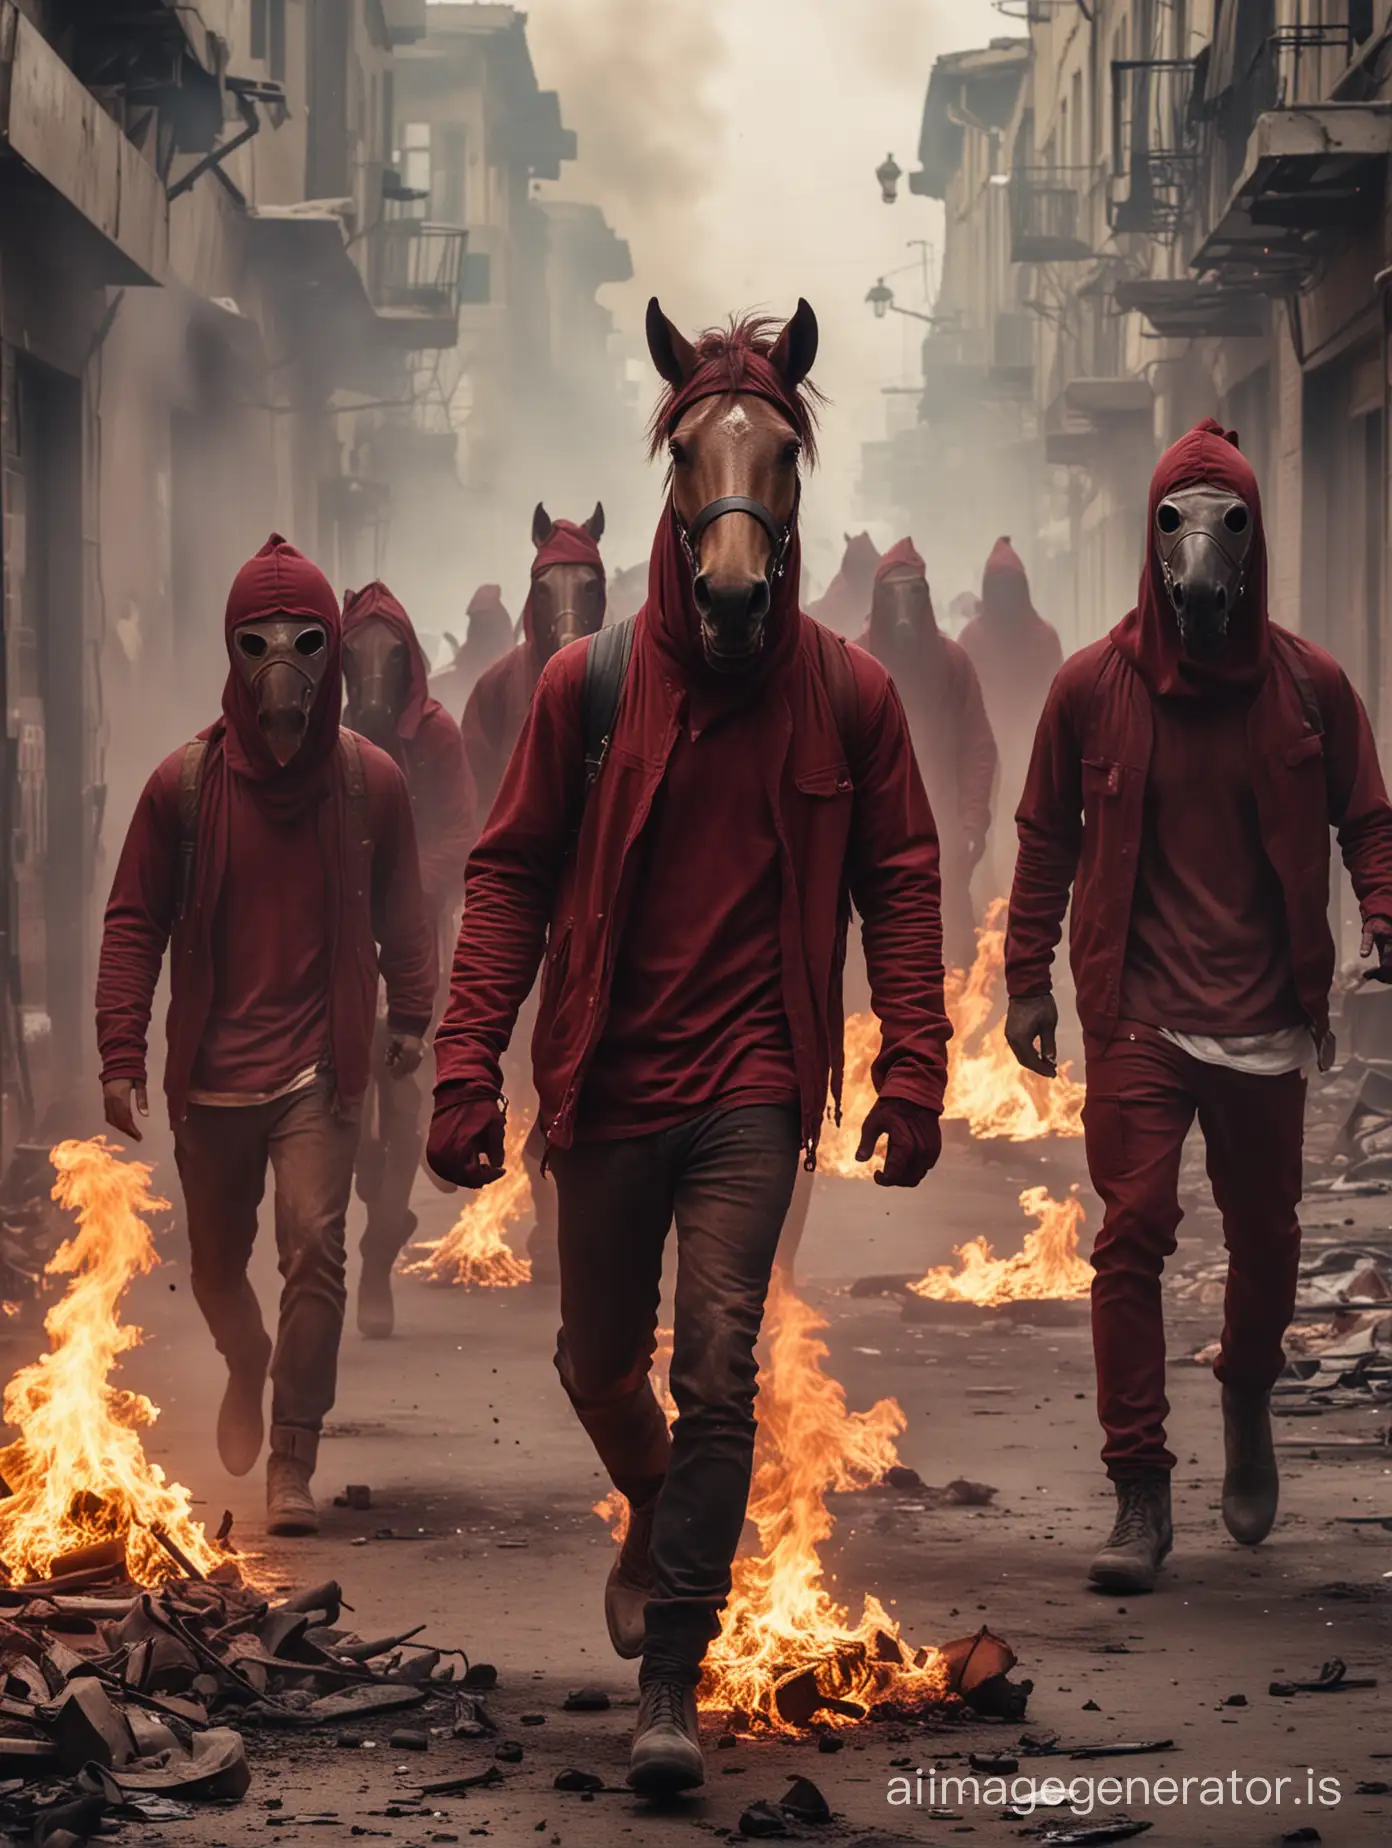 MaroonClad-Hooligans-with-Flares-Run-Amidst-Burning-City